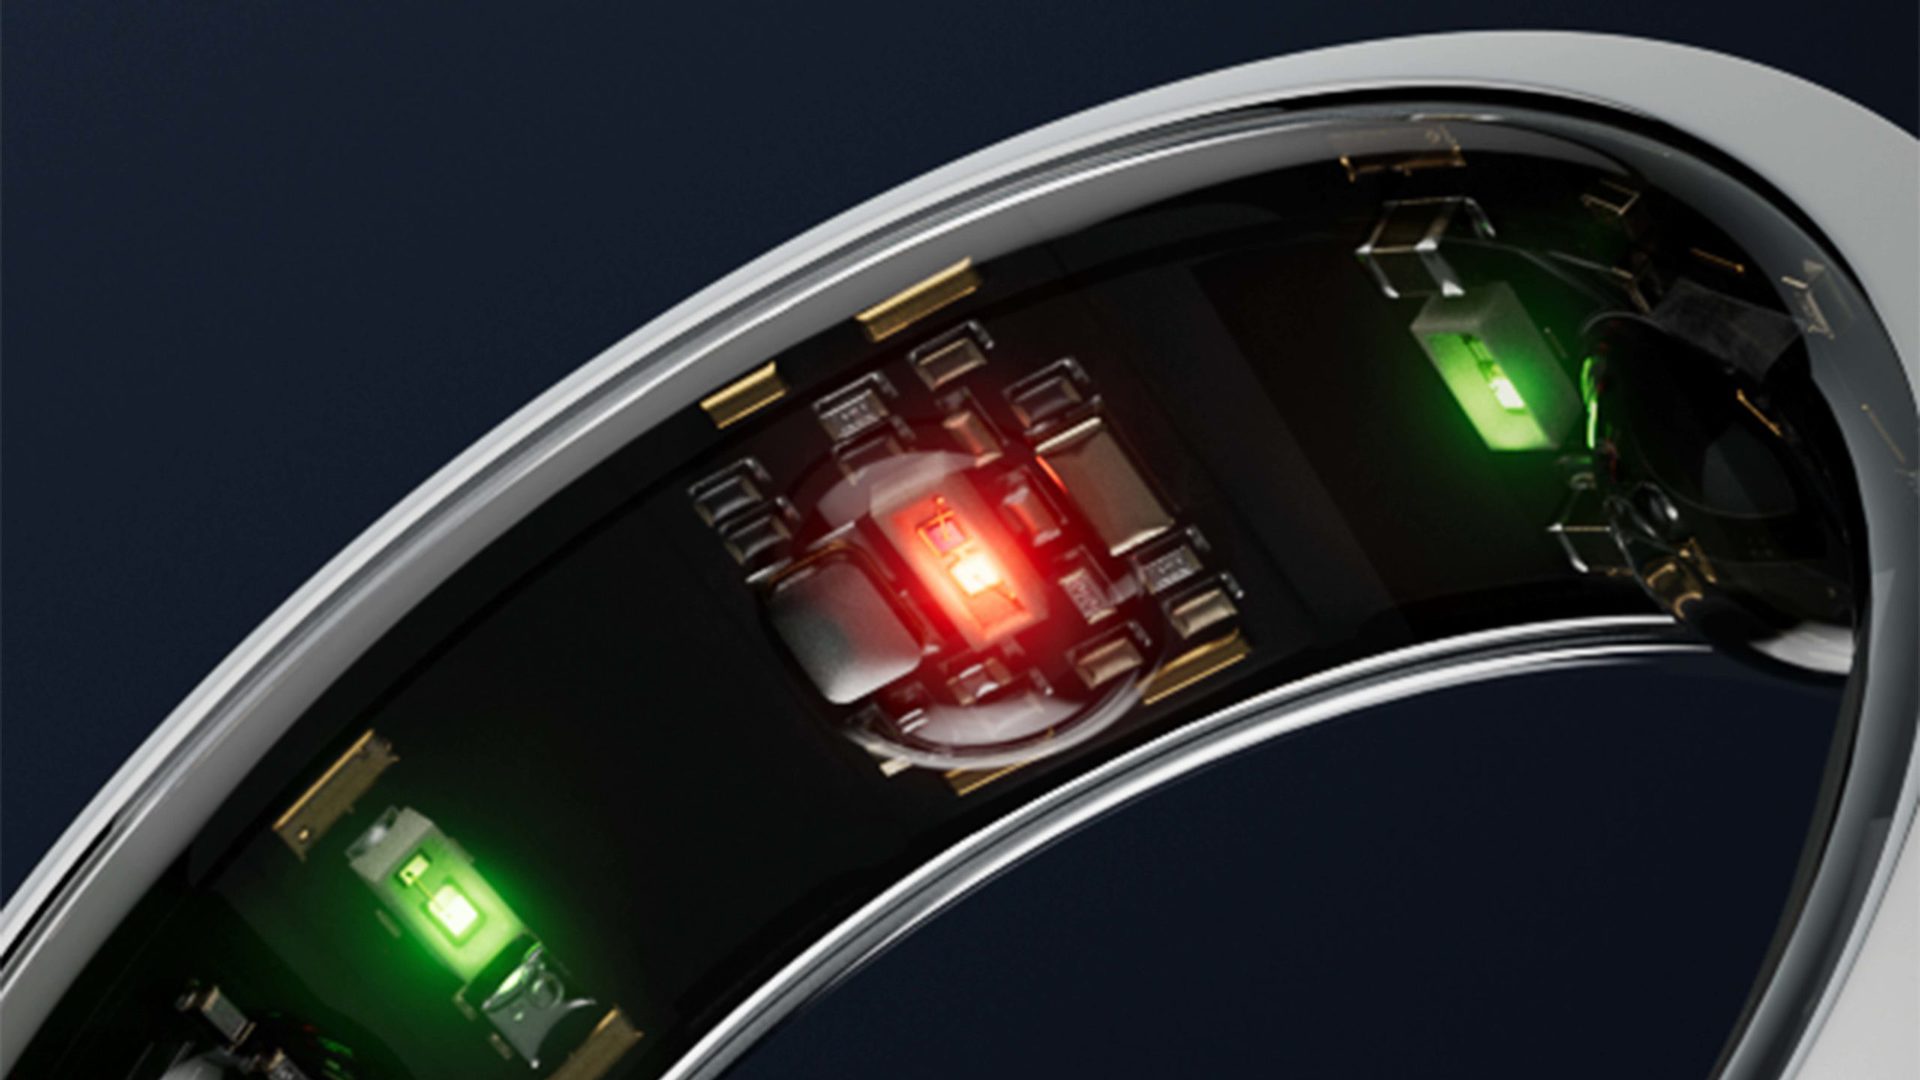 A macro image of the Oura Ring Generation 3 shows the devices new green LEDs.